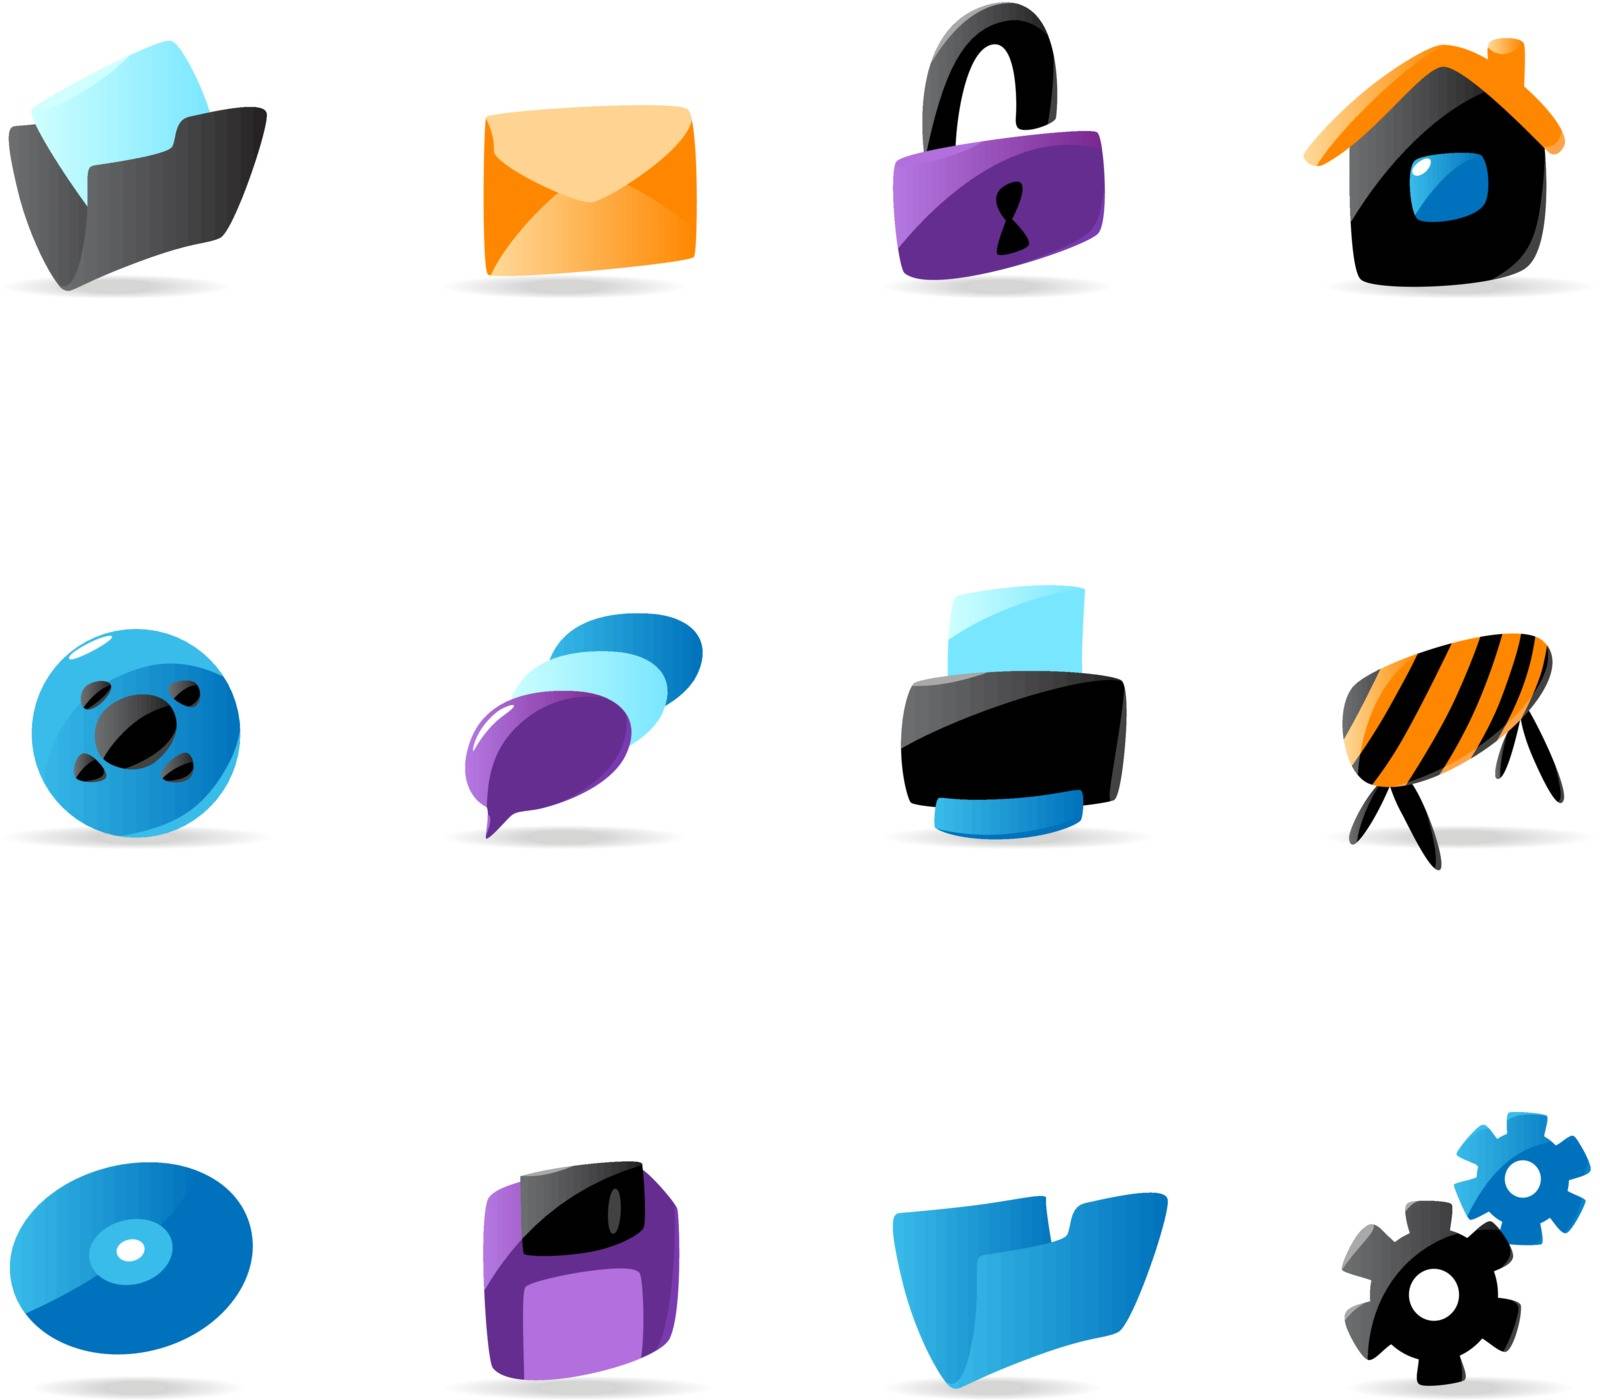 Bright website and interface icons. Vector illustration